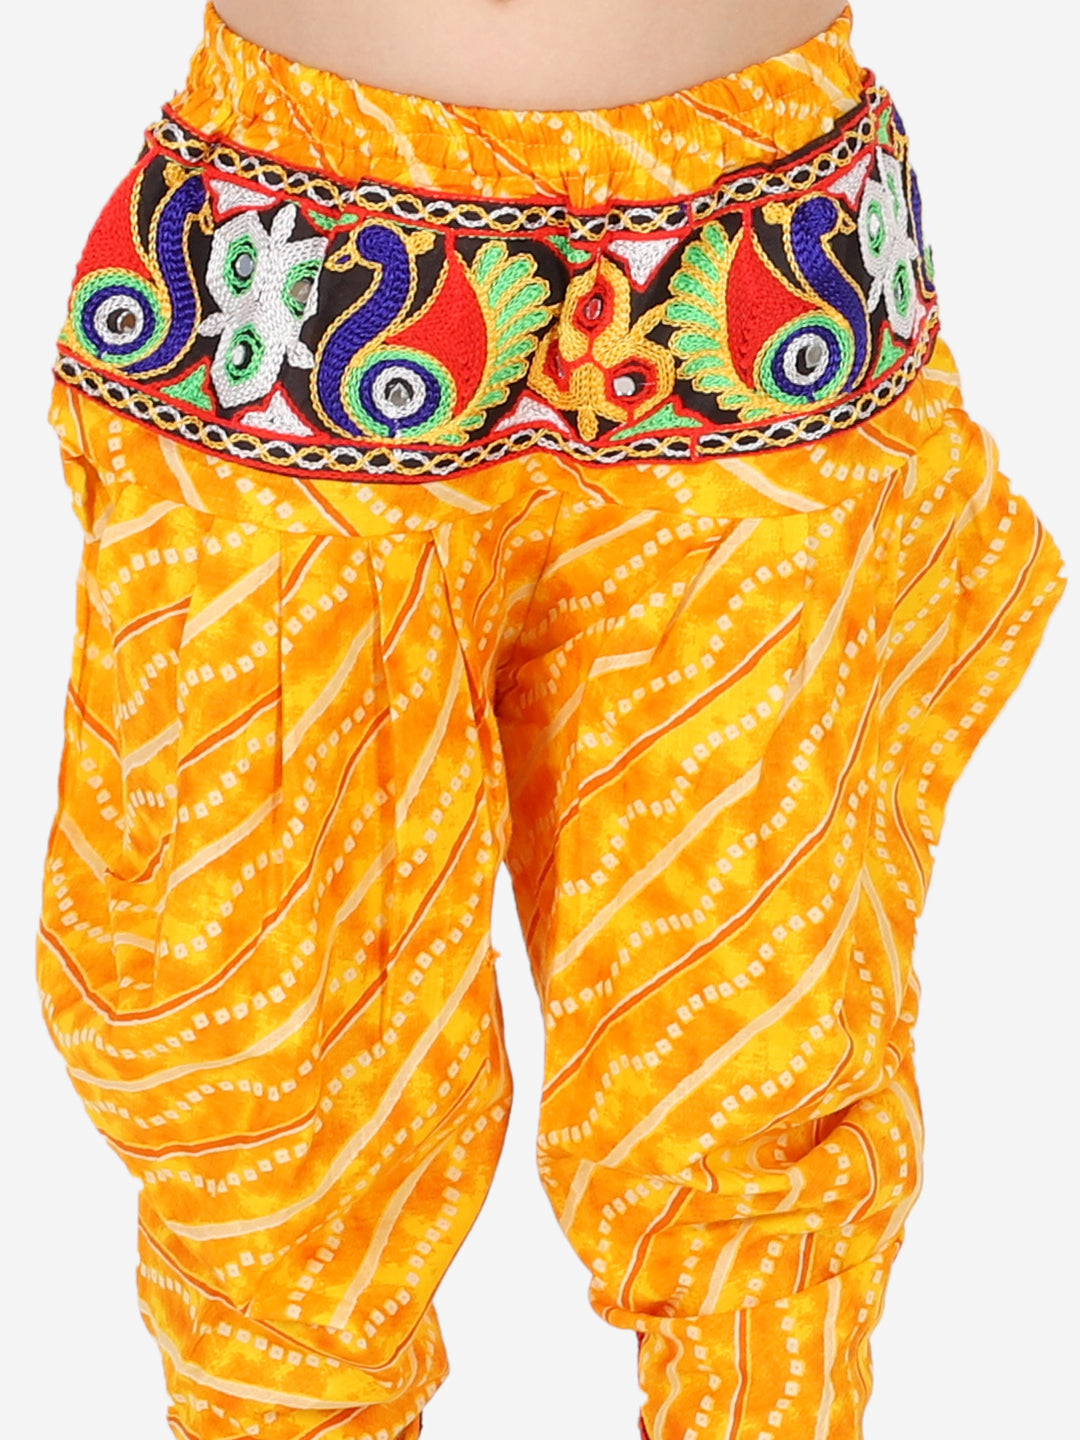 Girls Ethnic Navratri Indo-western Wear Cotton Choli Top with elastic dhoti - Yellow NOZ2TOZ - Made In INDIA.